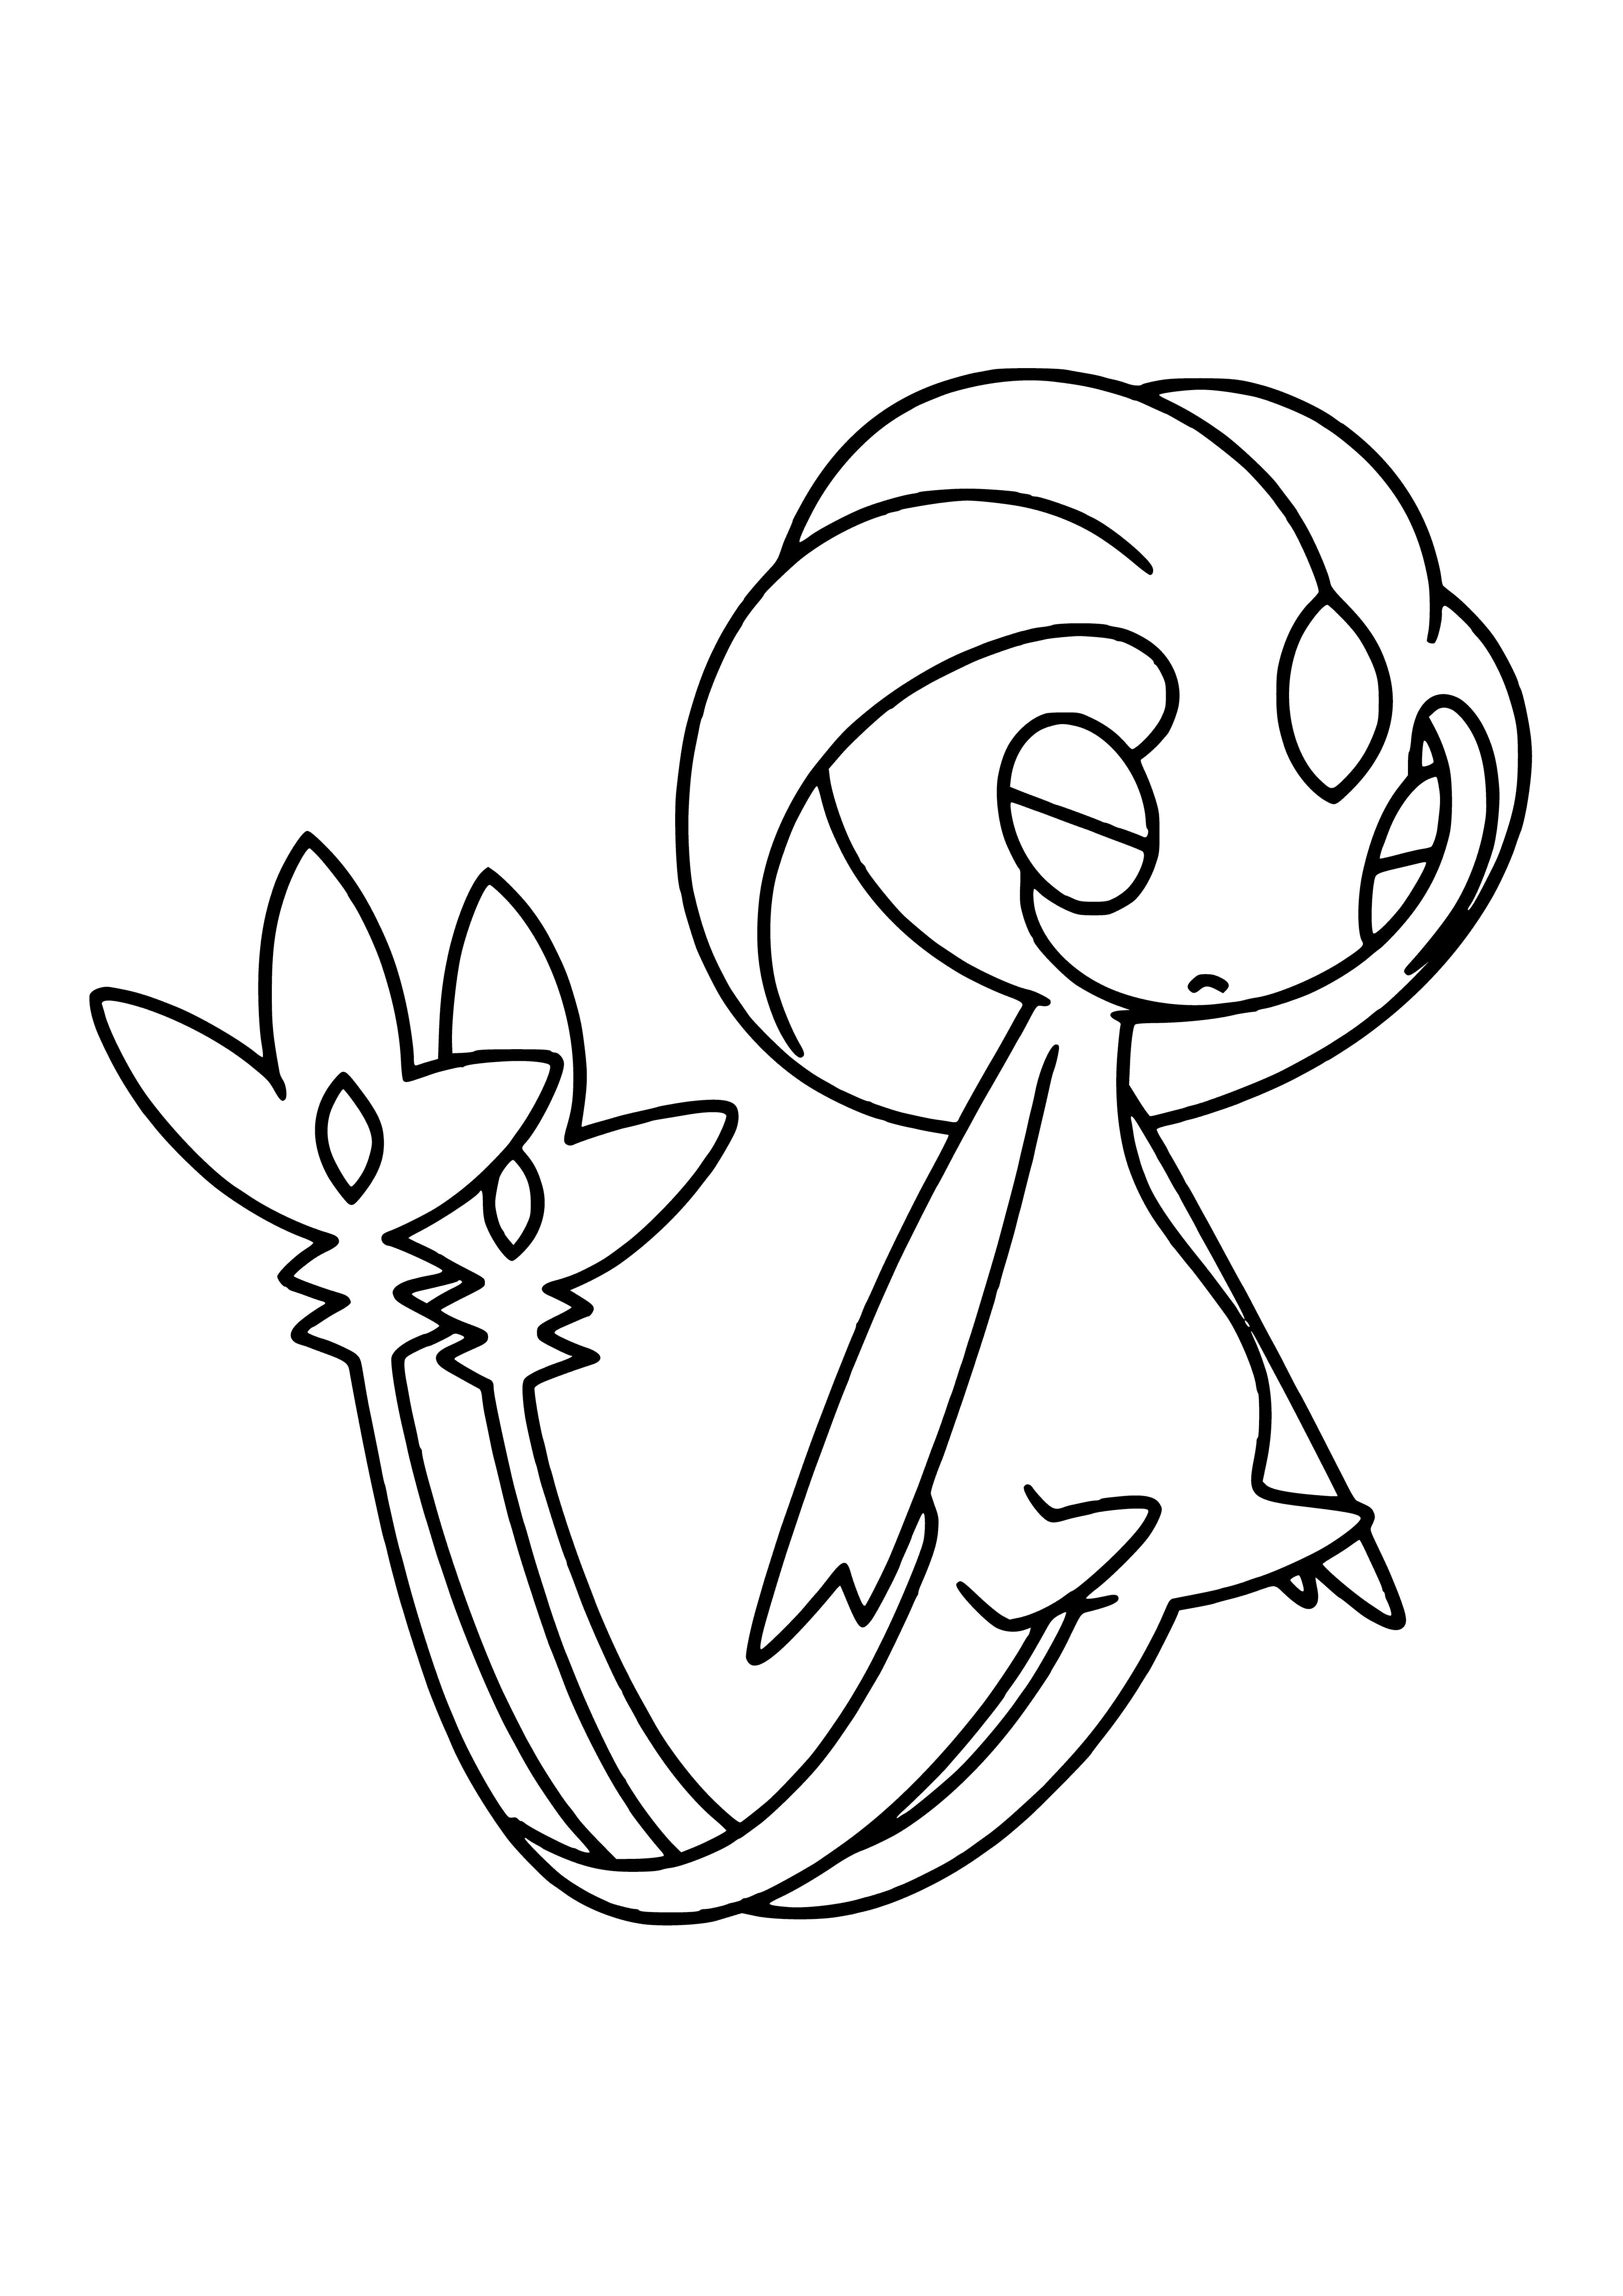 Legendary Pokemon Uxie coloring page